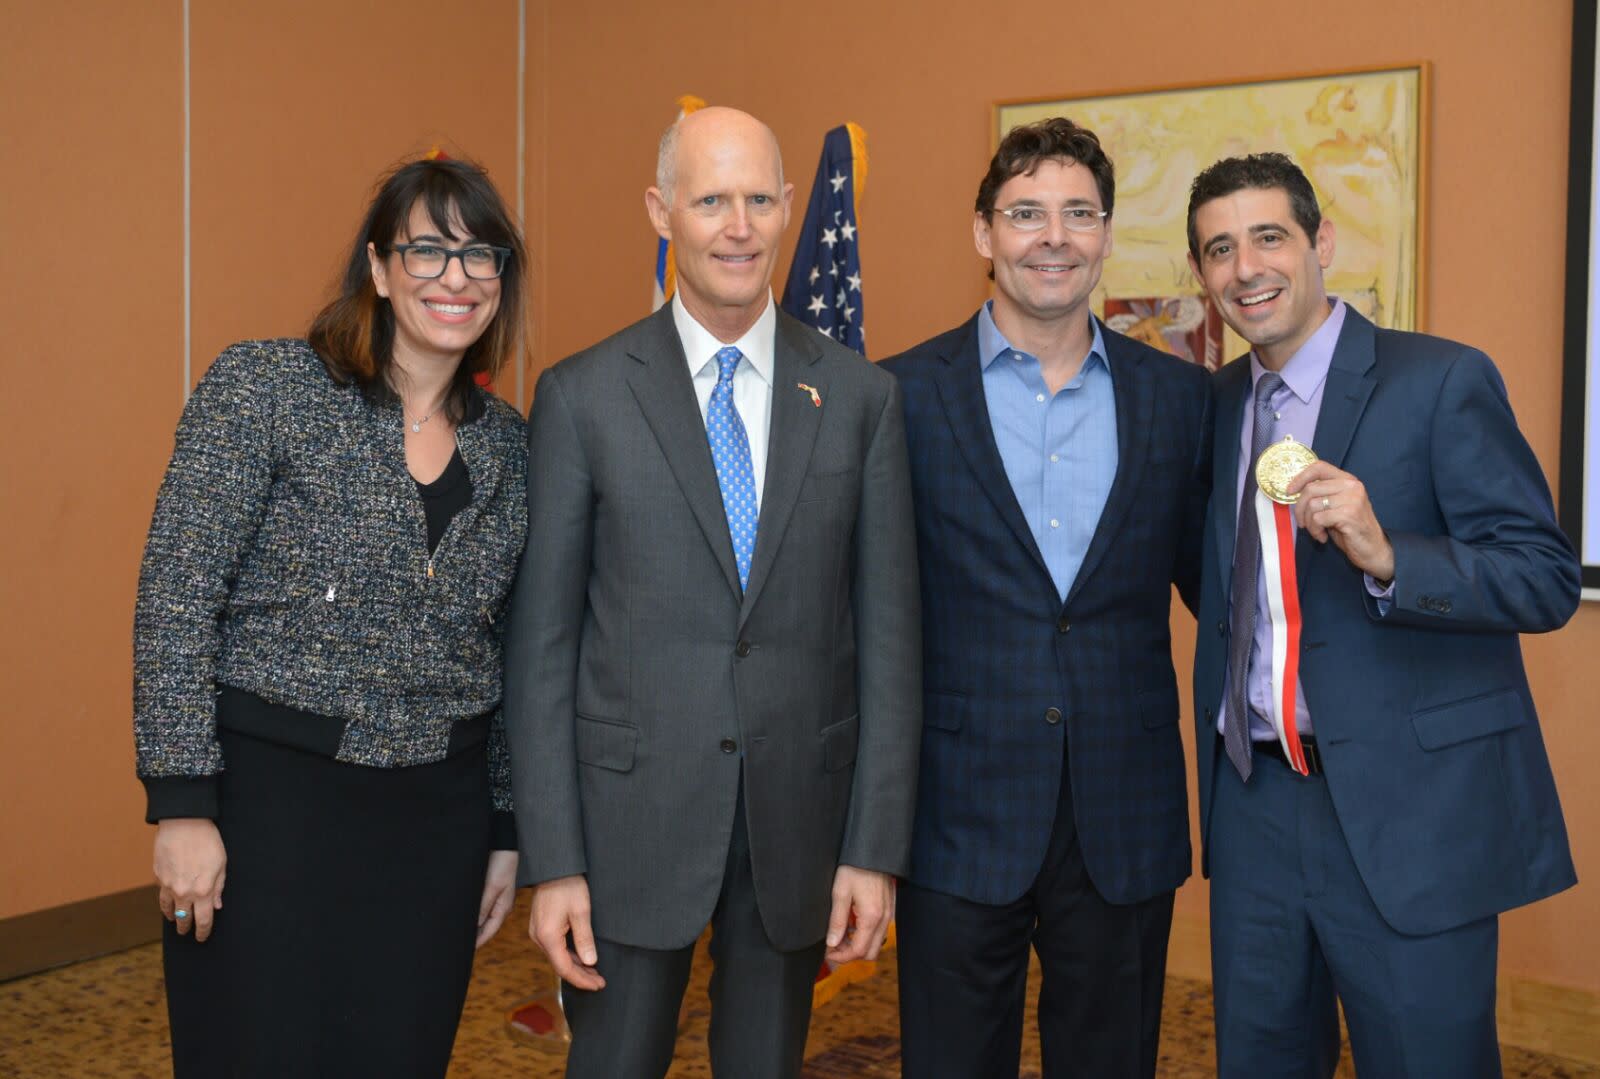 Scott gave an award on Monday to executives from Israeli aerospace company Stemrad, which has worked closely with Florida firms. (Courtesy)